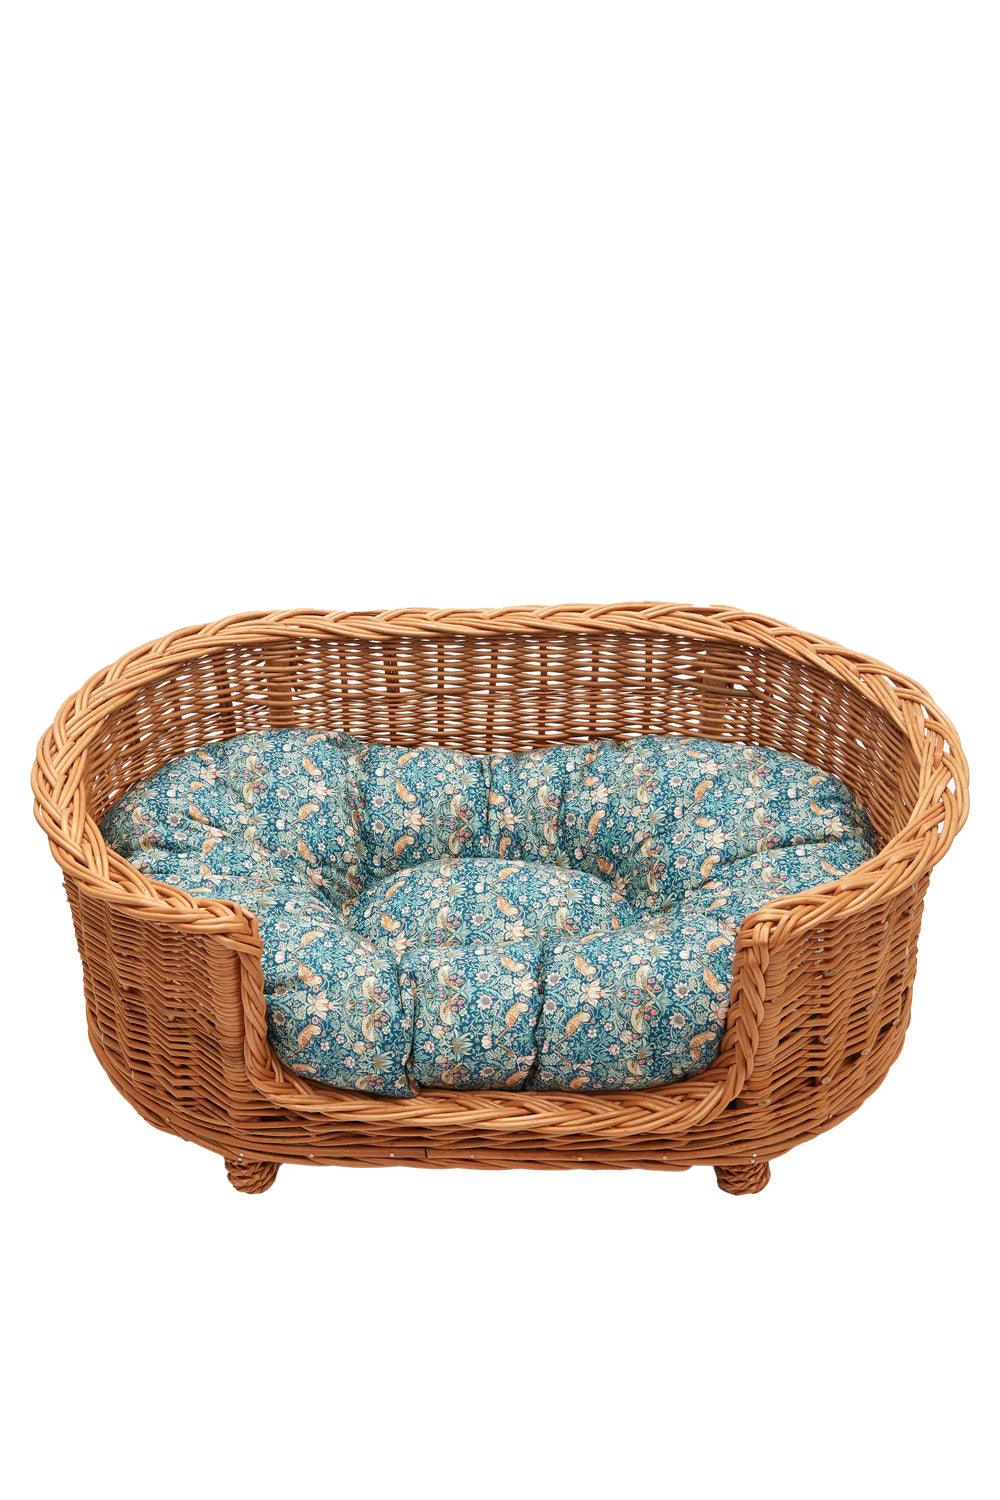 Wicker Oval Pet Bed made with Liberty Fabric STRAWBERRY THIEF - Coco & Wolf